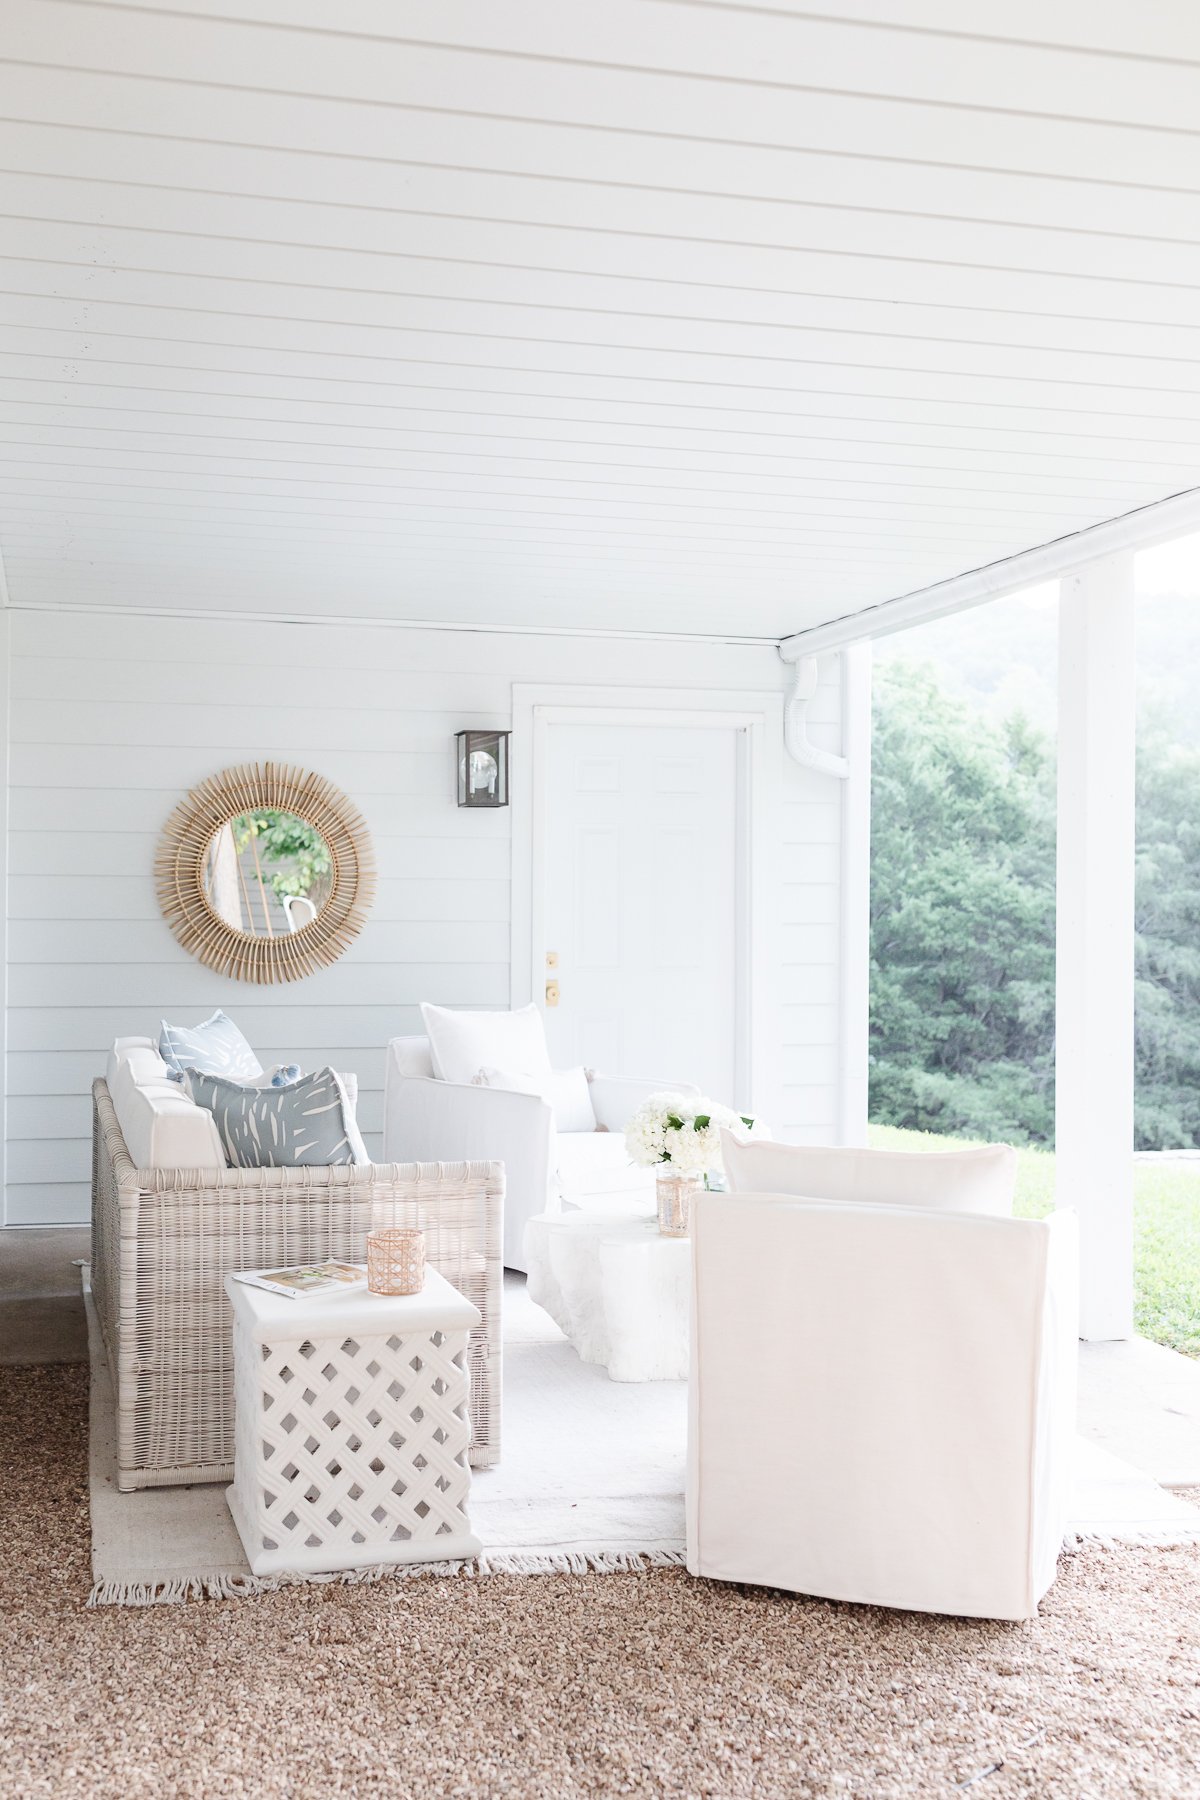 A white covered porch with wicker furniture and ceramic garden stools.